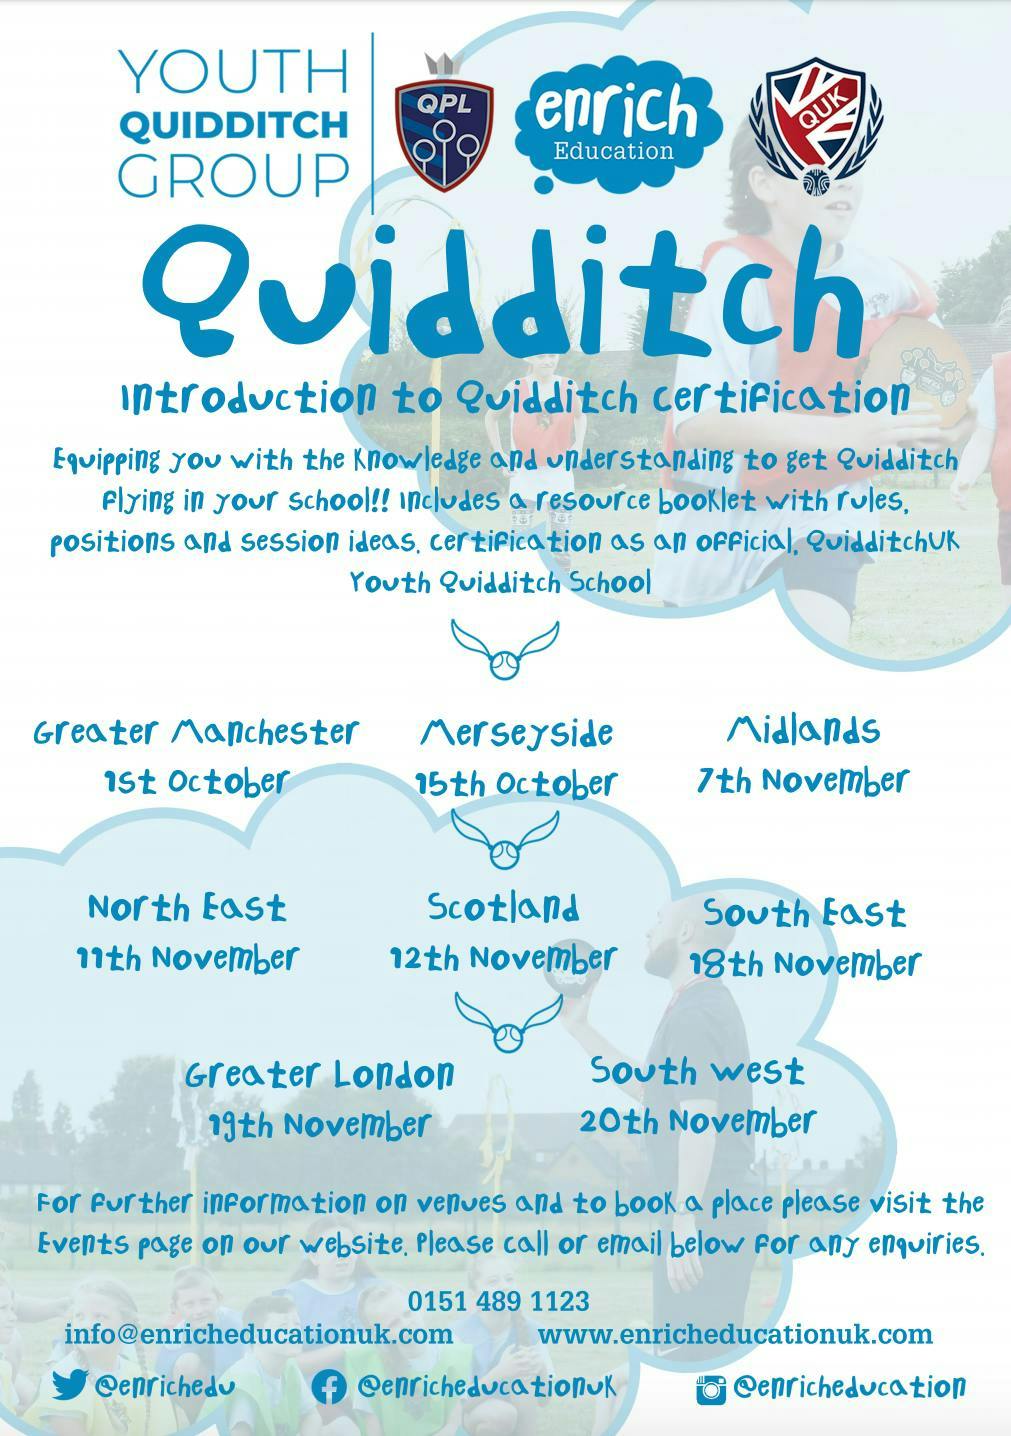 A flyer for the Introduction to Quidditch Certification, with various dates for sessions